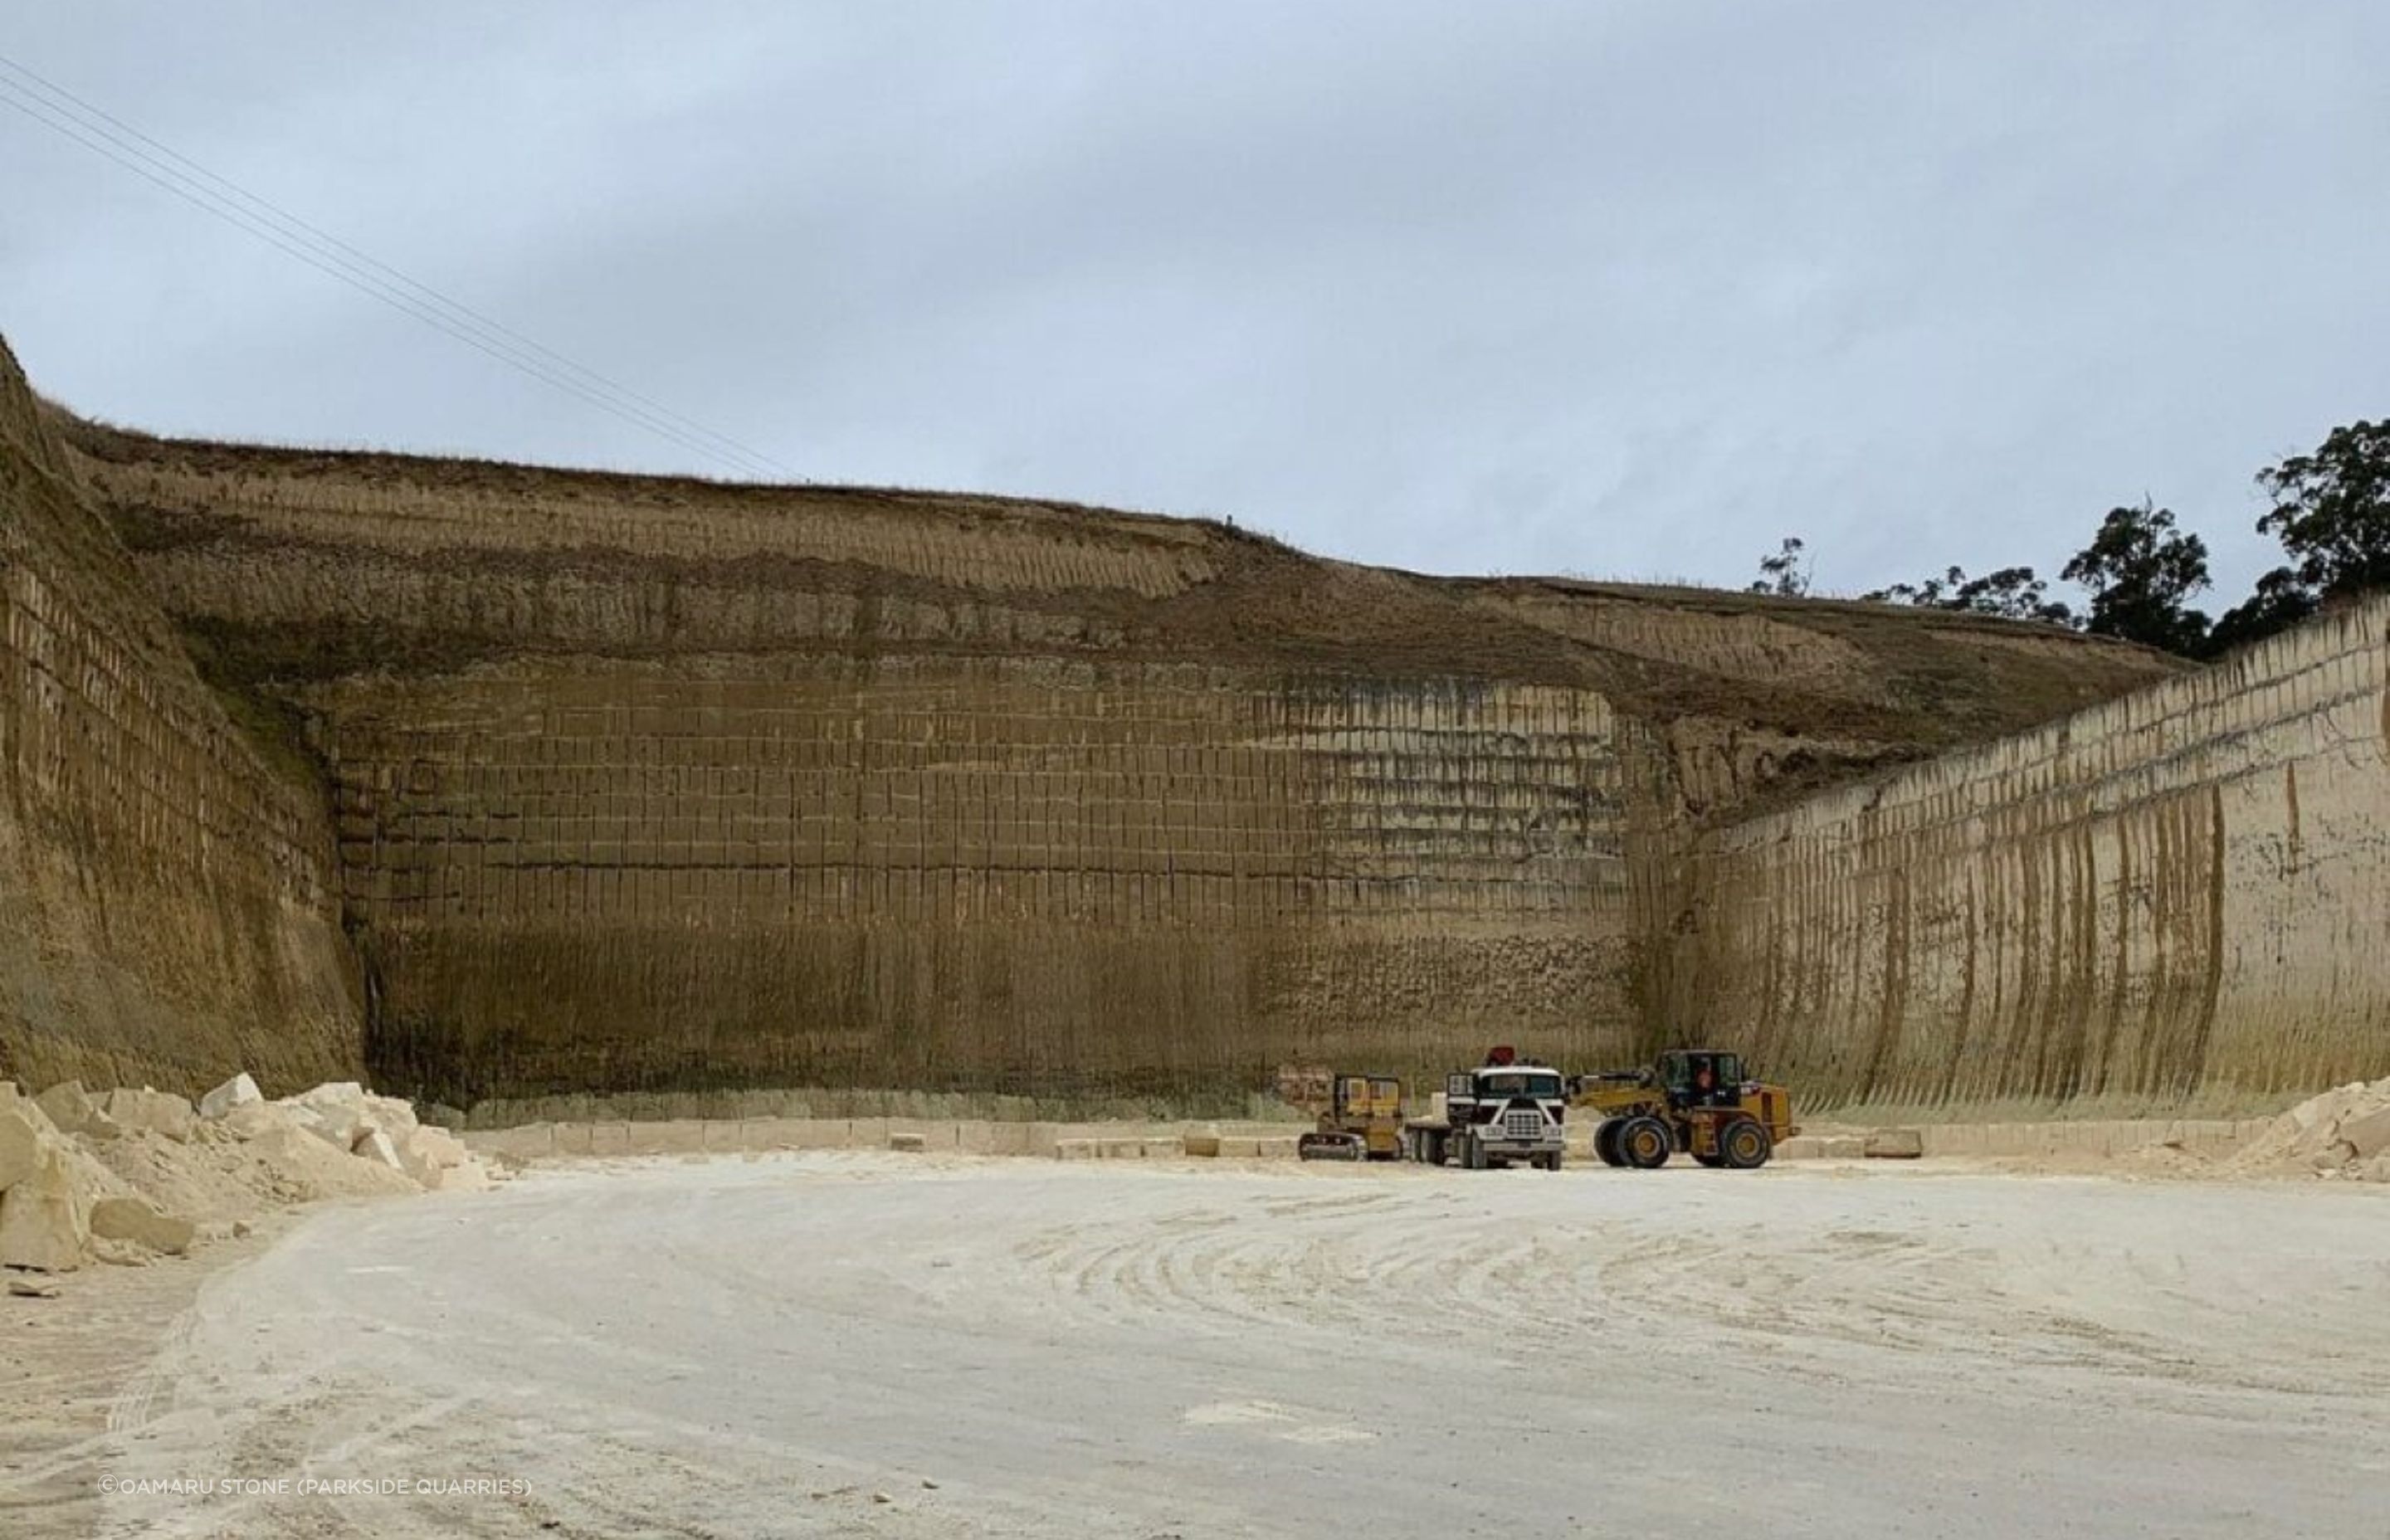 An inside look at Parkside Limestone Quarry where each Ōamaru Stone block is extracted.